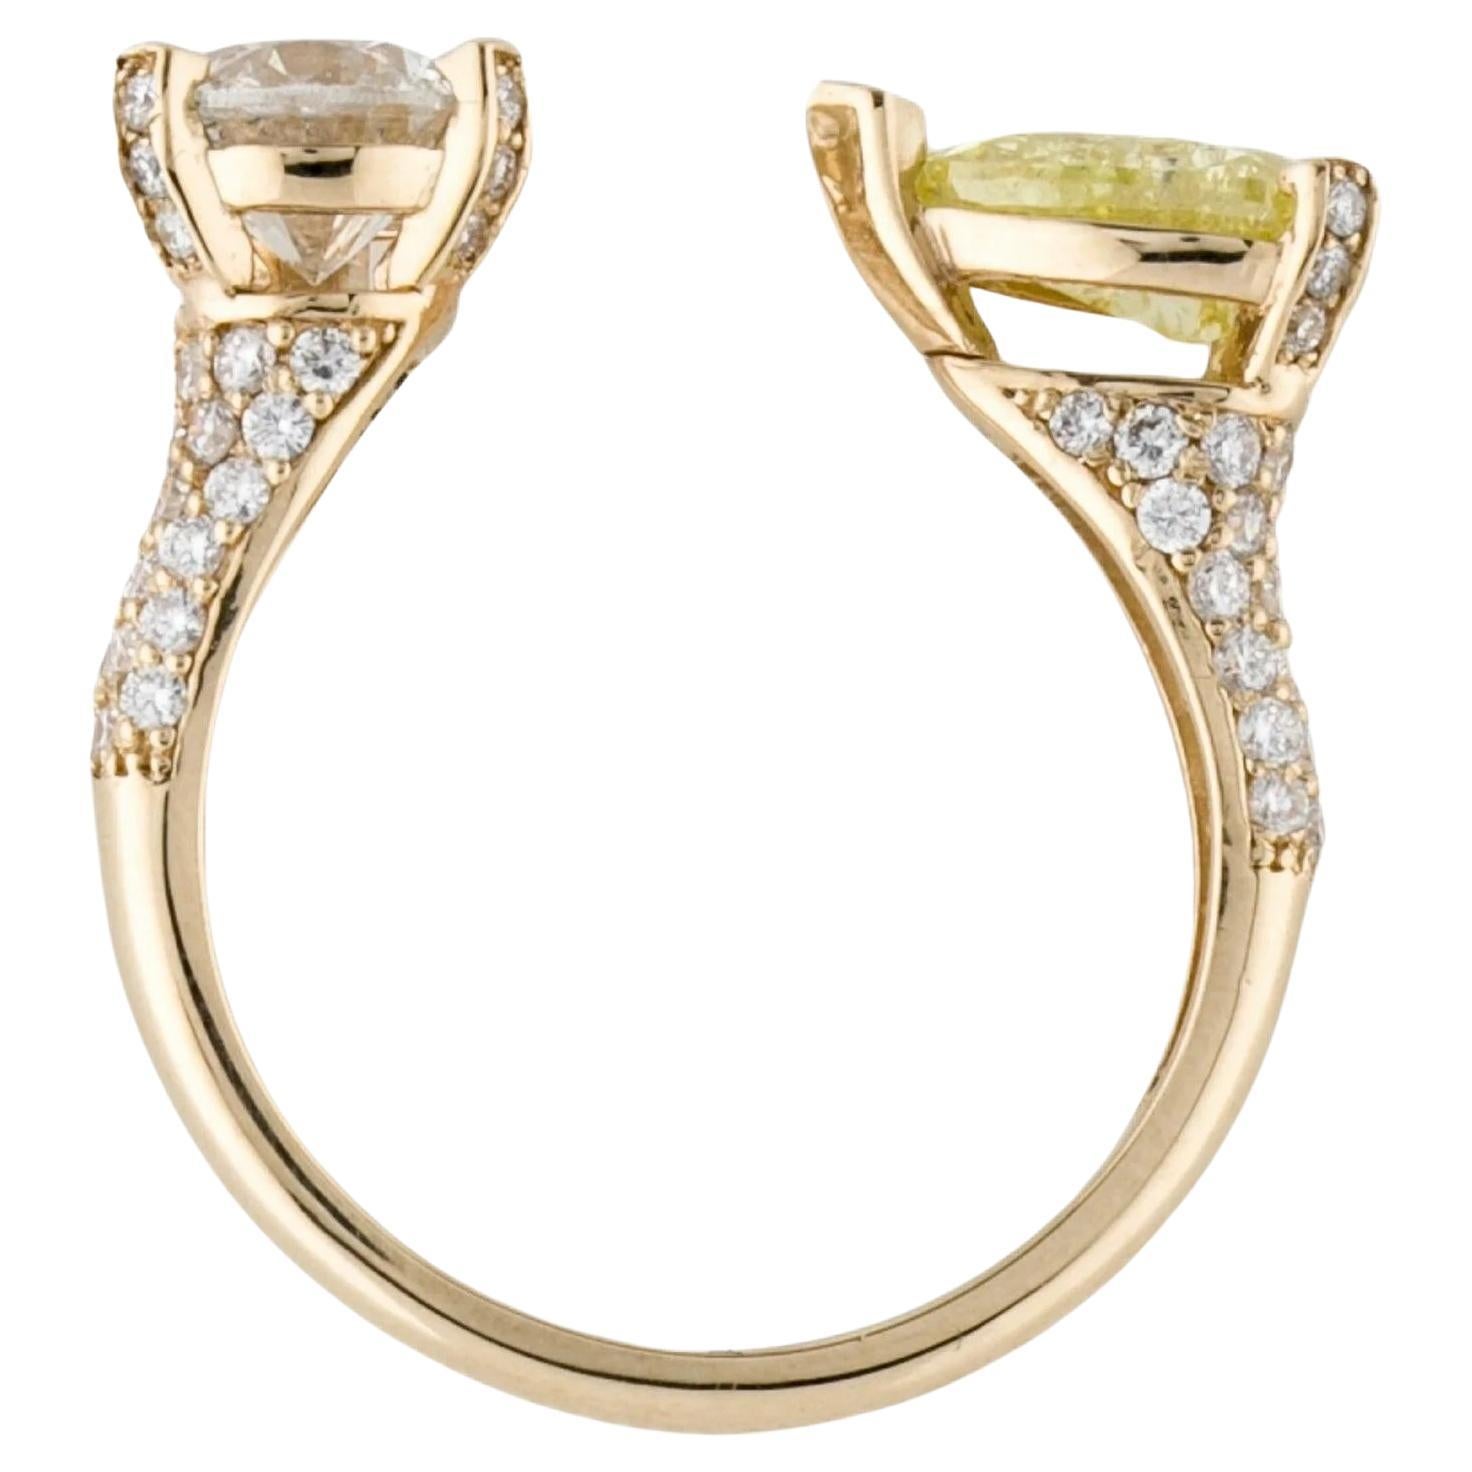 A Truly breathtaking 2.52ctw Diamond *Toi et Moi* Bypass Ring. 
One-of-a-kind beauty.

Featuring a Fancy Intense Yellow pear-shaped diamond and H color round-shaped diamond, accented by 66 round brilliant cut diamonds. Both center stones are